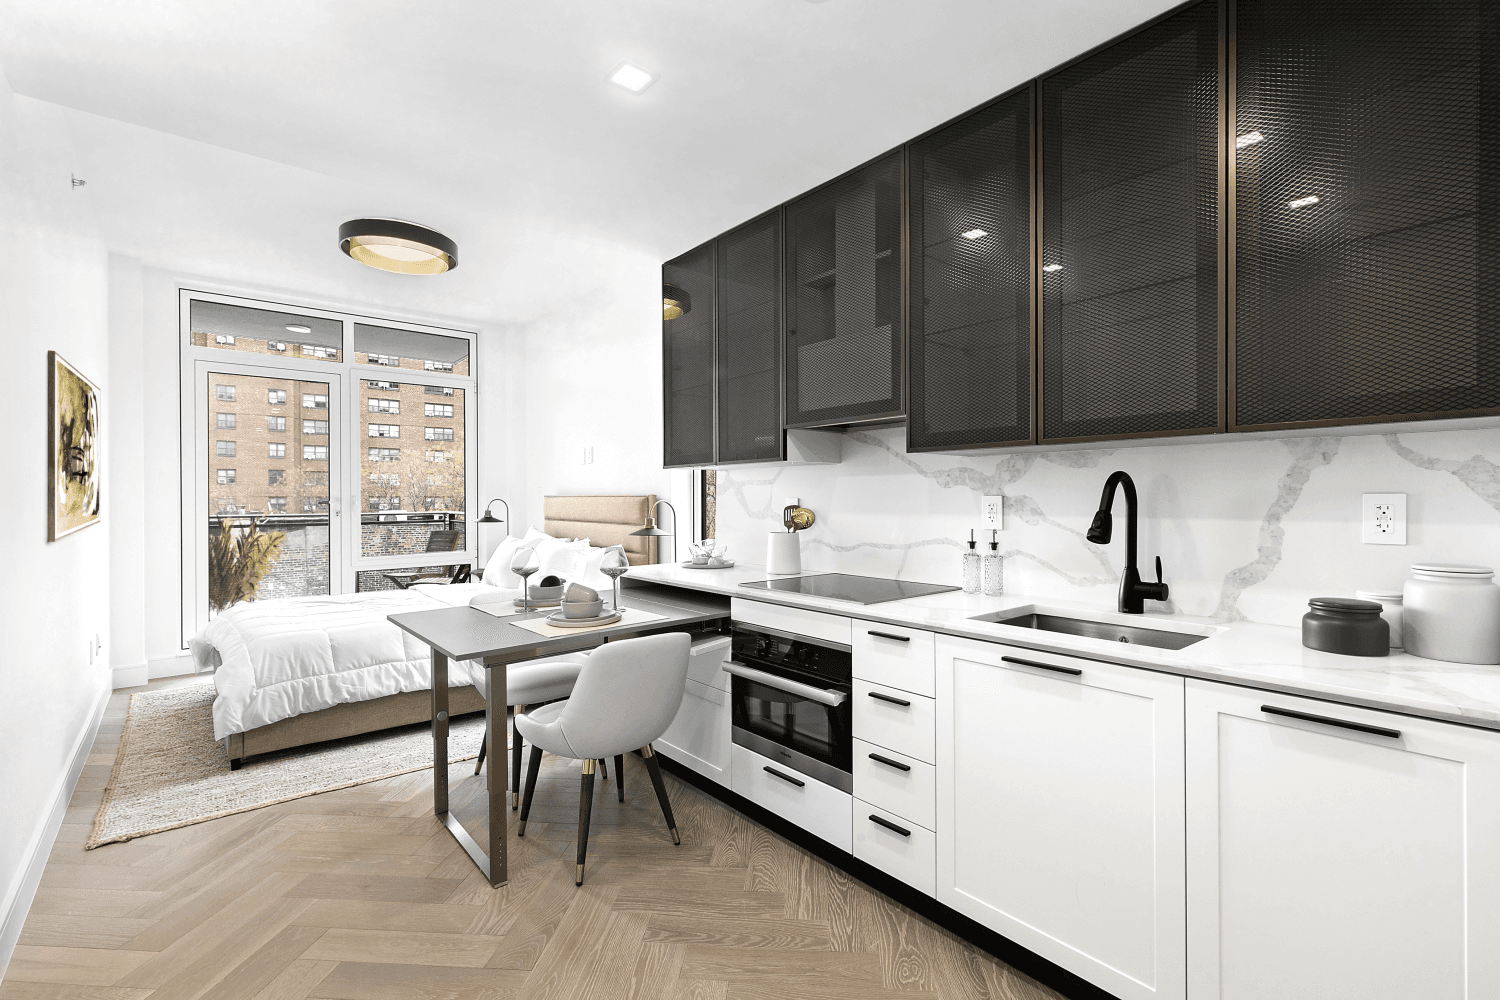 Unit 5C at The 101 Condominium features a distinctive studio layout with two separate rooms and a private balcony, making the residence function much more like a junior 1 bedroom.